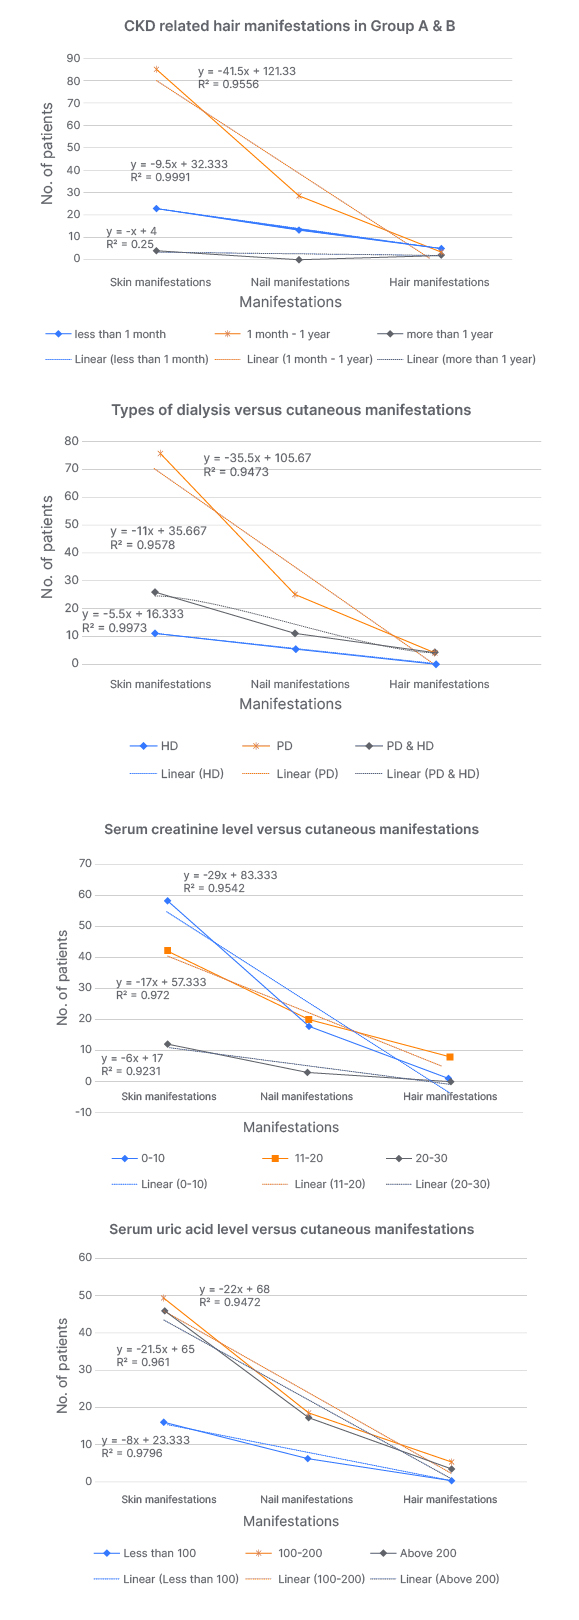 Figure 2 Correlation between duration and type of dialysis, serum creatinine, and uric acid level with cutaneous manifestations